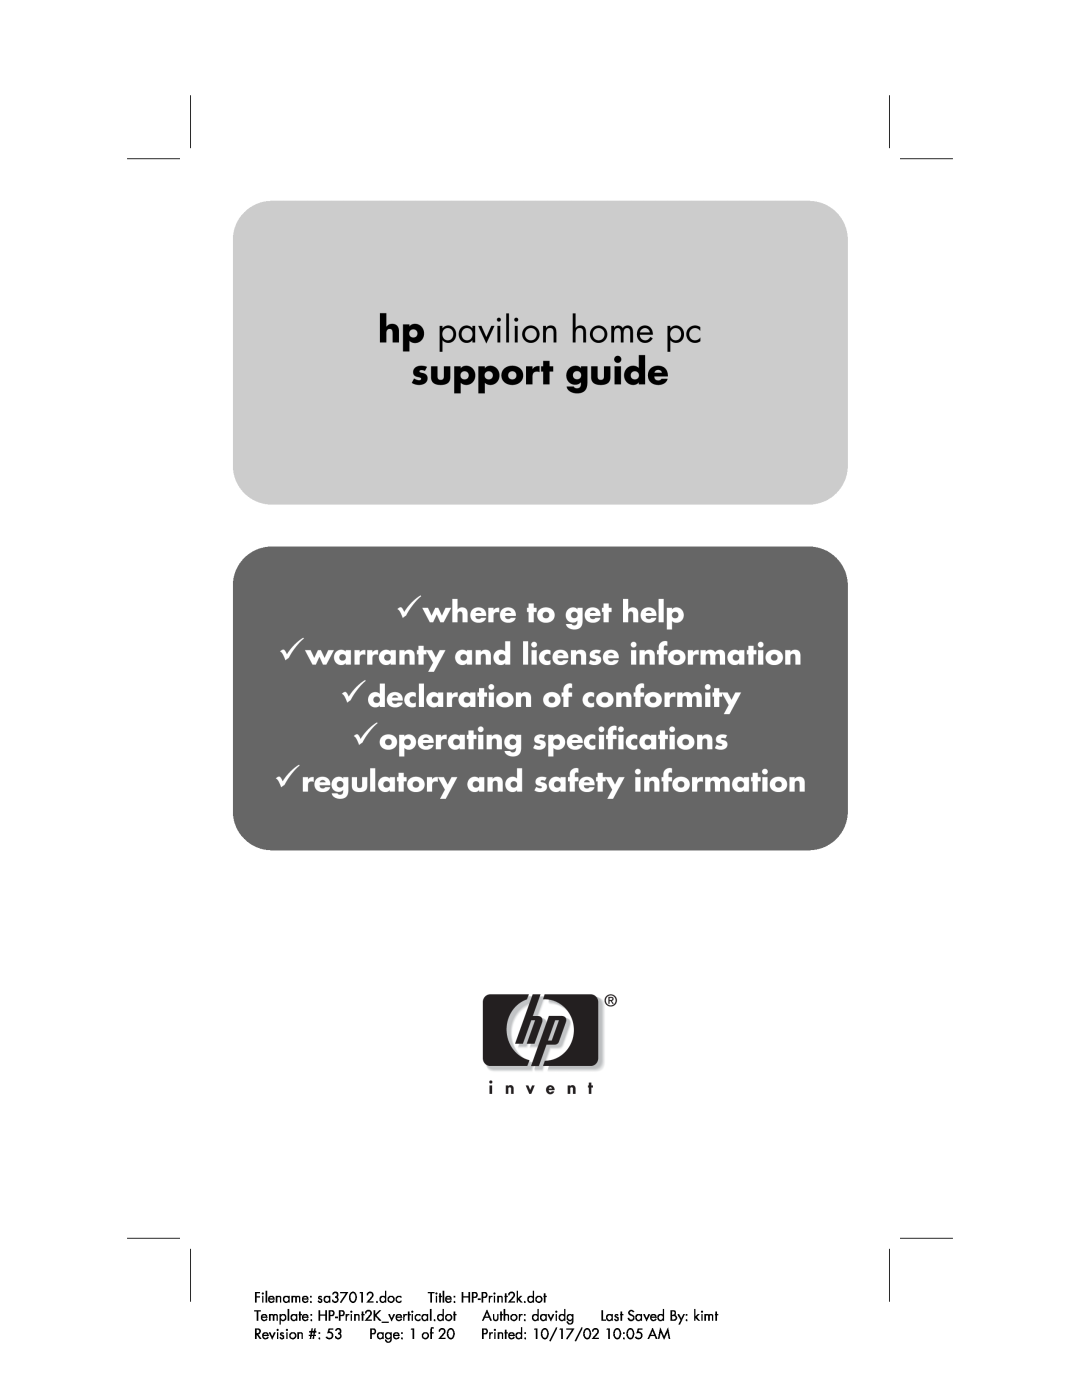 HP 734d (AP) manual where to get help warranty and license information, hp pavilion home pc, support guide, Author davidg 